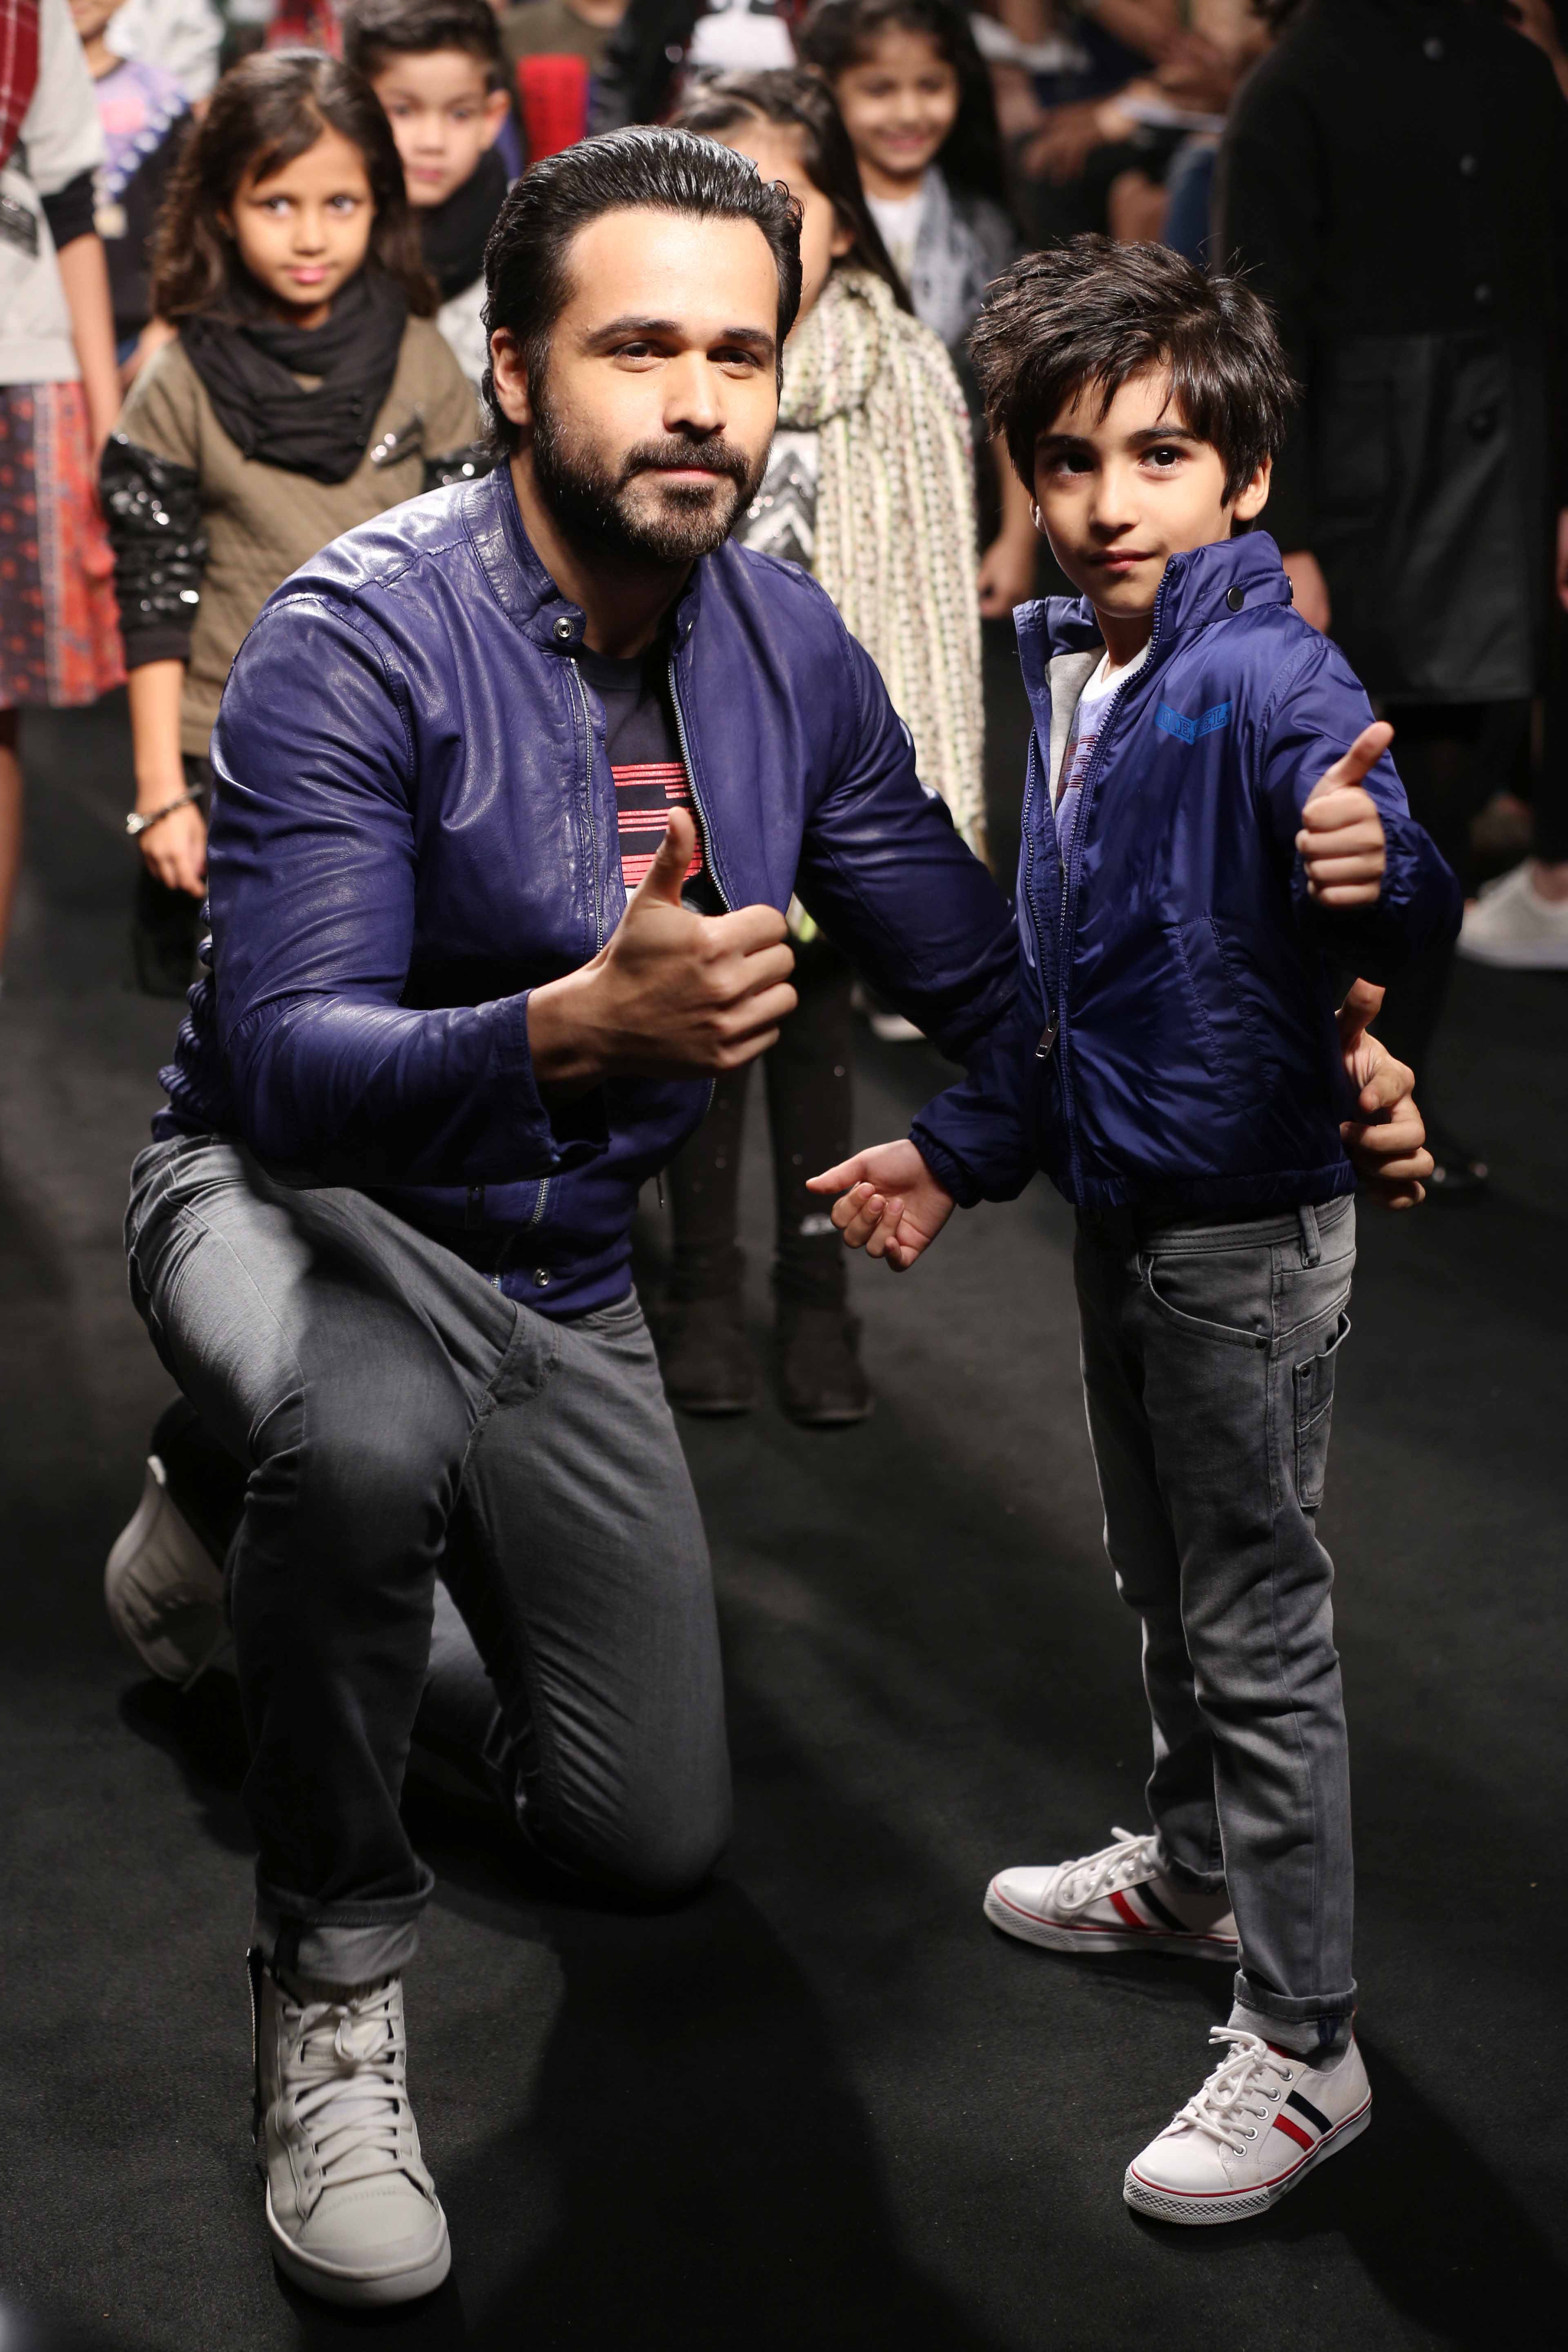 Lakme Fashion Week 2016 Emraan Hashmi Walks The Ramp With His Son At The Hamleys Show Emraan hashmi biography and some unknown facts. lakme fashion week 2016 emraan hashmi walks the ramp with his son at the hamleys show